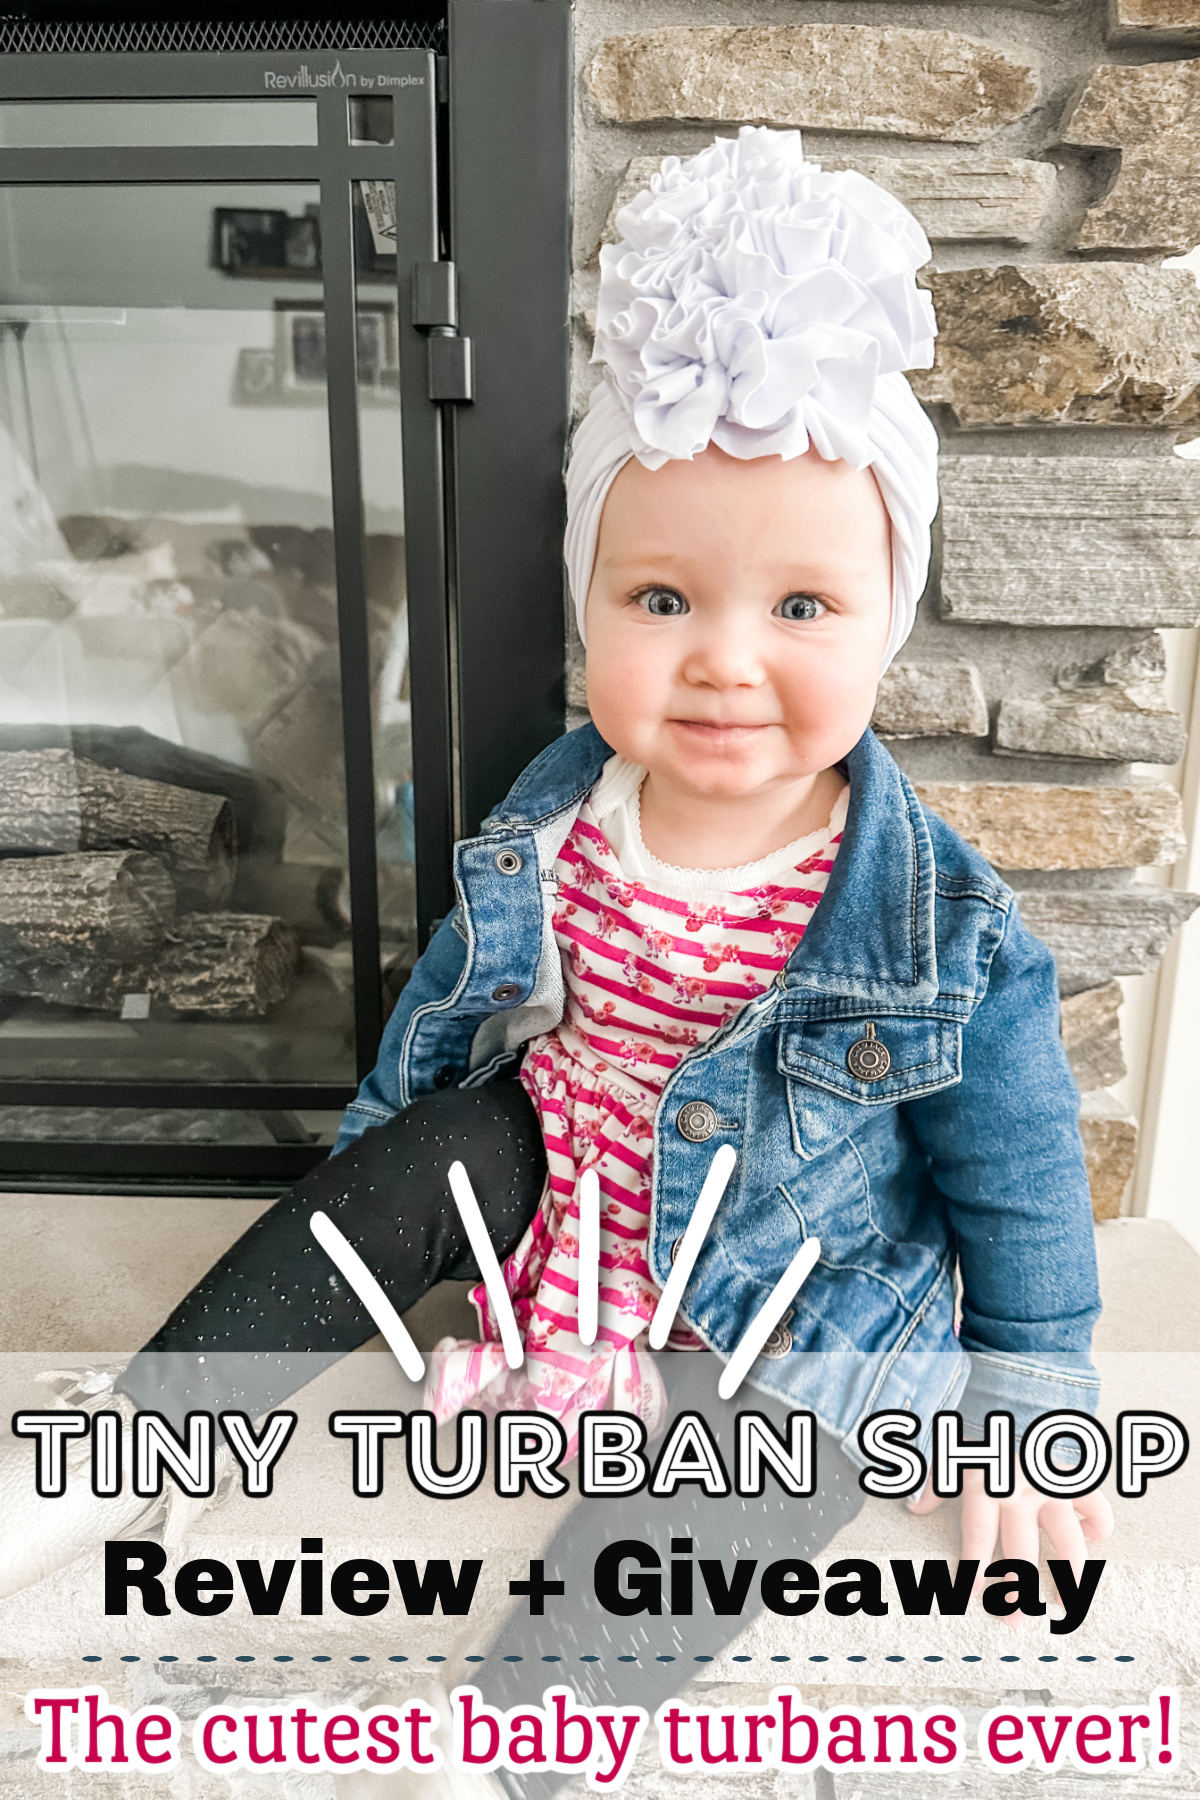 Tiny Turban Shop Review: The cutest baby turbans available!